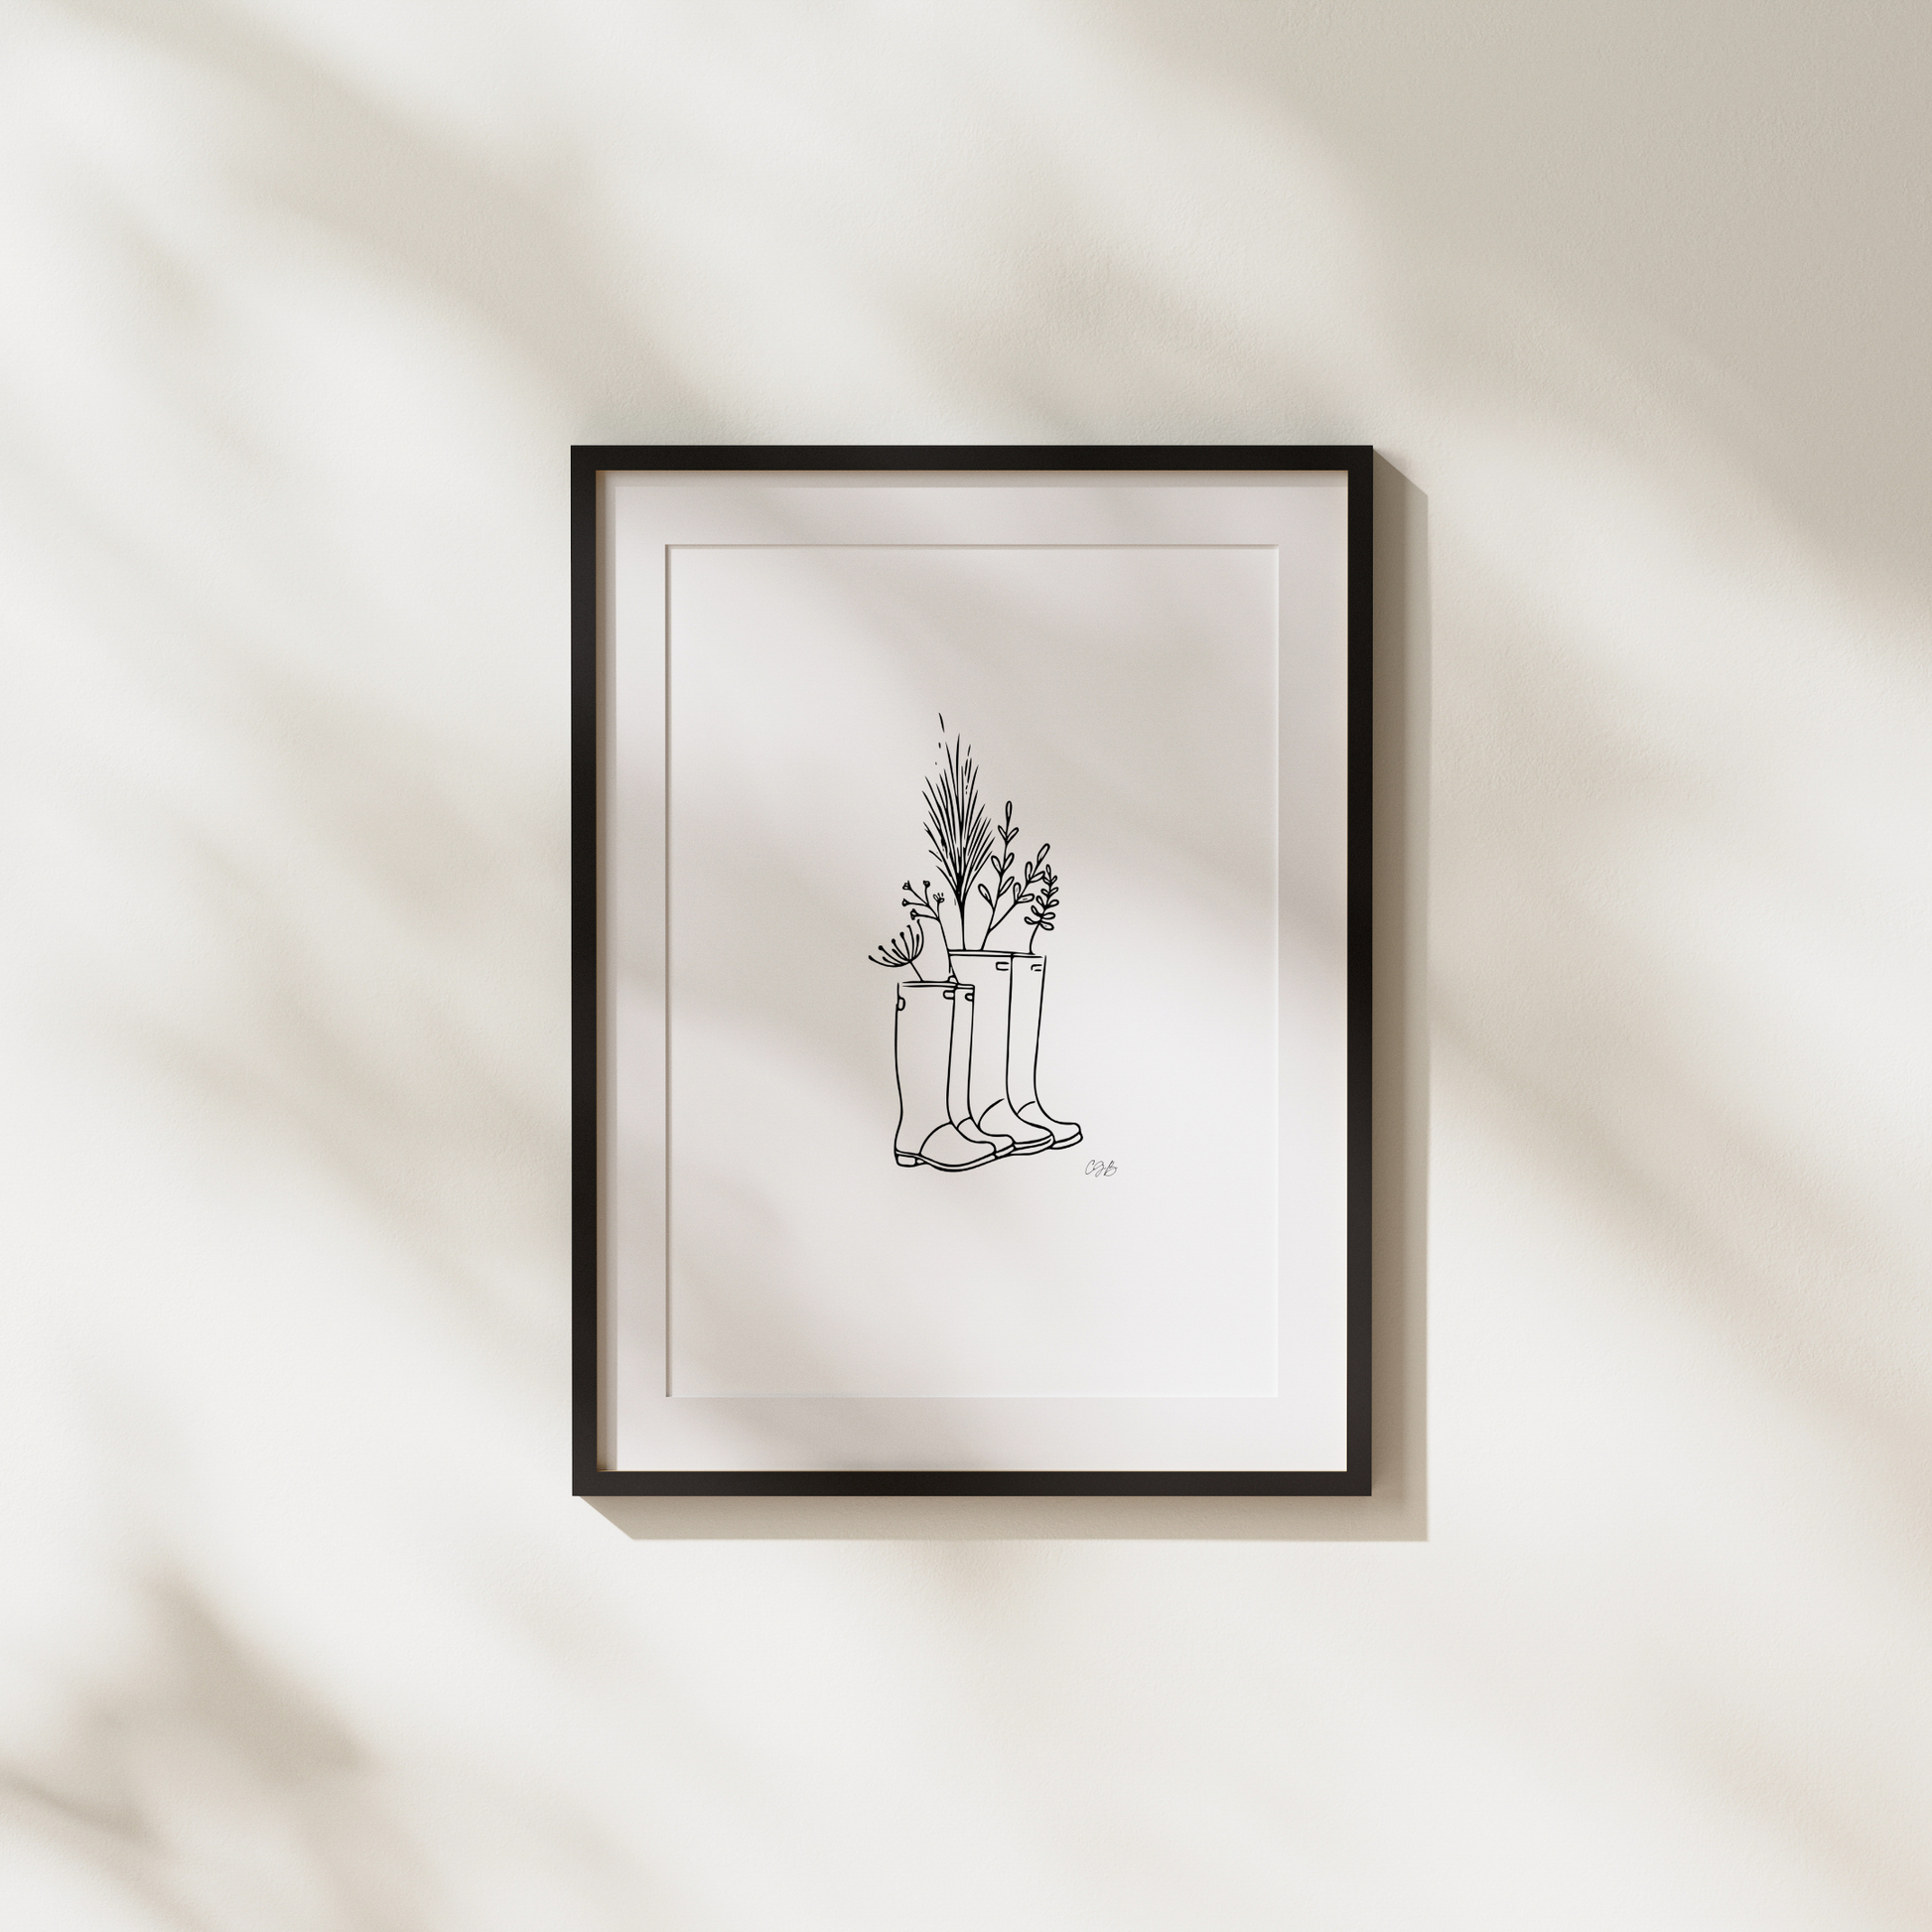 Wellington Boots | Minimalistic A4 Wall Art | Countryside Living Decor - The Cotswold Illustrated Company